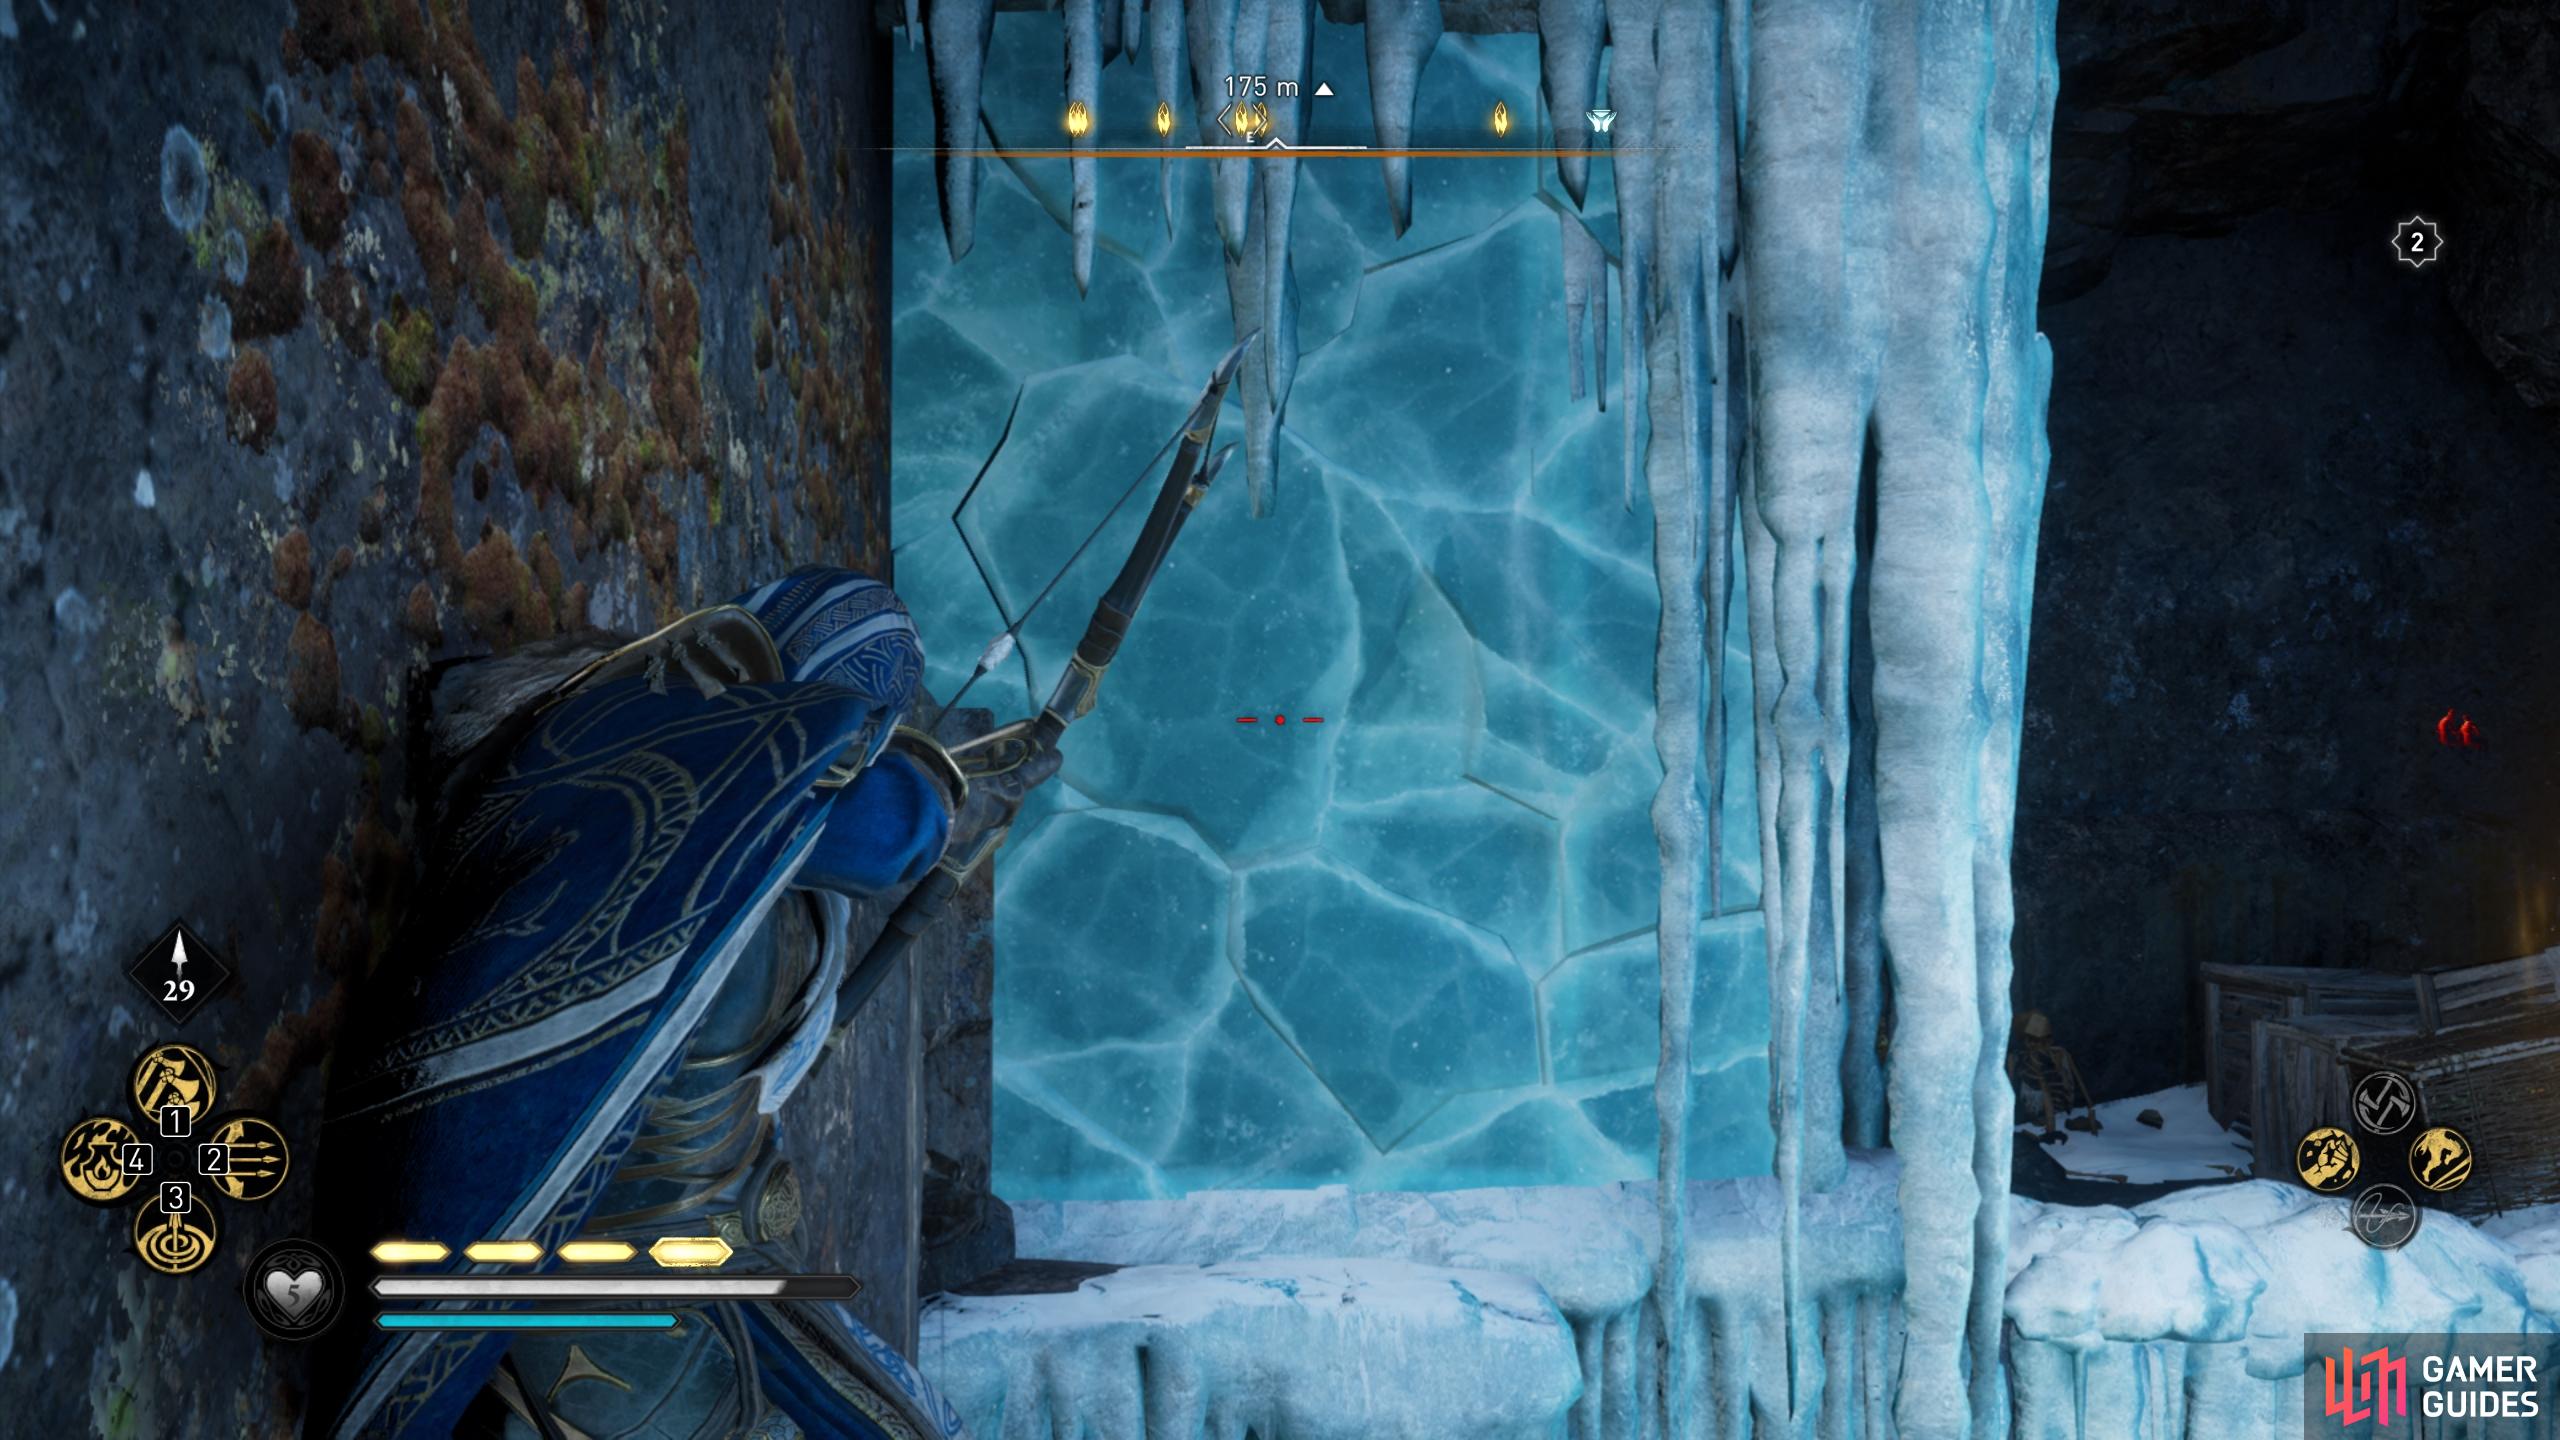 Shoot the ice within the room to jump to the ledge where the chest can be found.